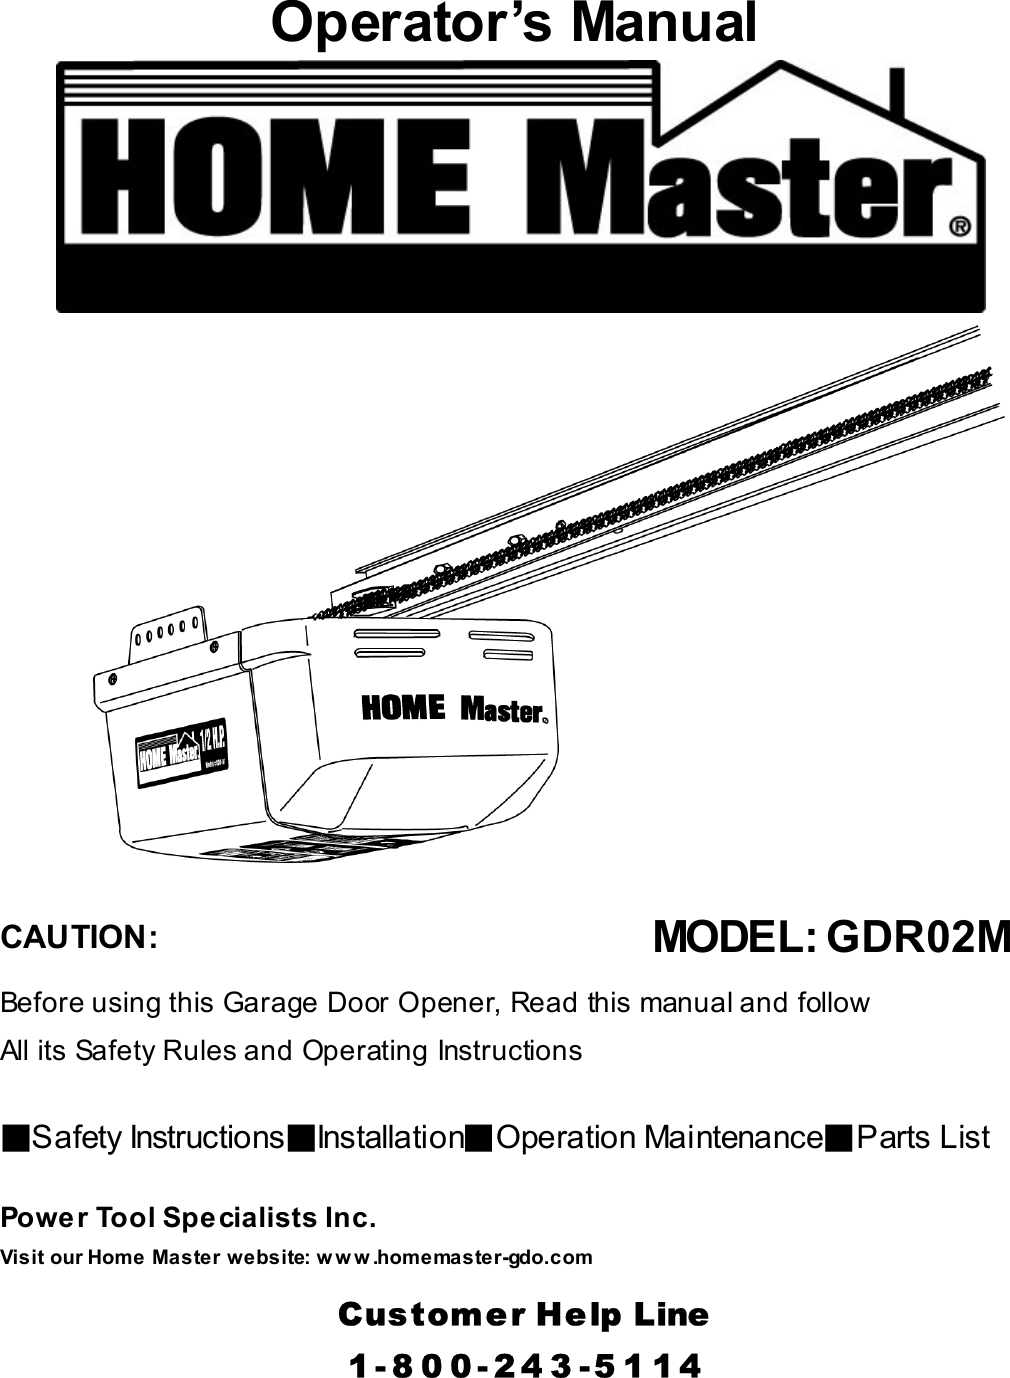 Operator’s Manual       GARAGE DOOR OPENER       CAUTION: Before using this Garage Door Opener, Read this manual and follow All its Safety Rules and Operating Instructions  ▓Safety Instructions▓Installation▓Operation Maintenance▓Parts List  Power Tool Specialists Inc. Visit our Home Master website: www.homemaster-gdo.com    Customer Help Line1-800-243-5114 MODEL: GDR02M